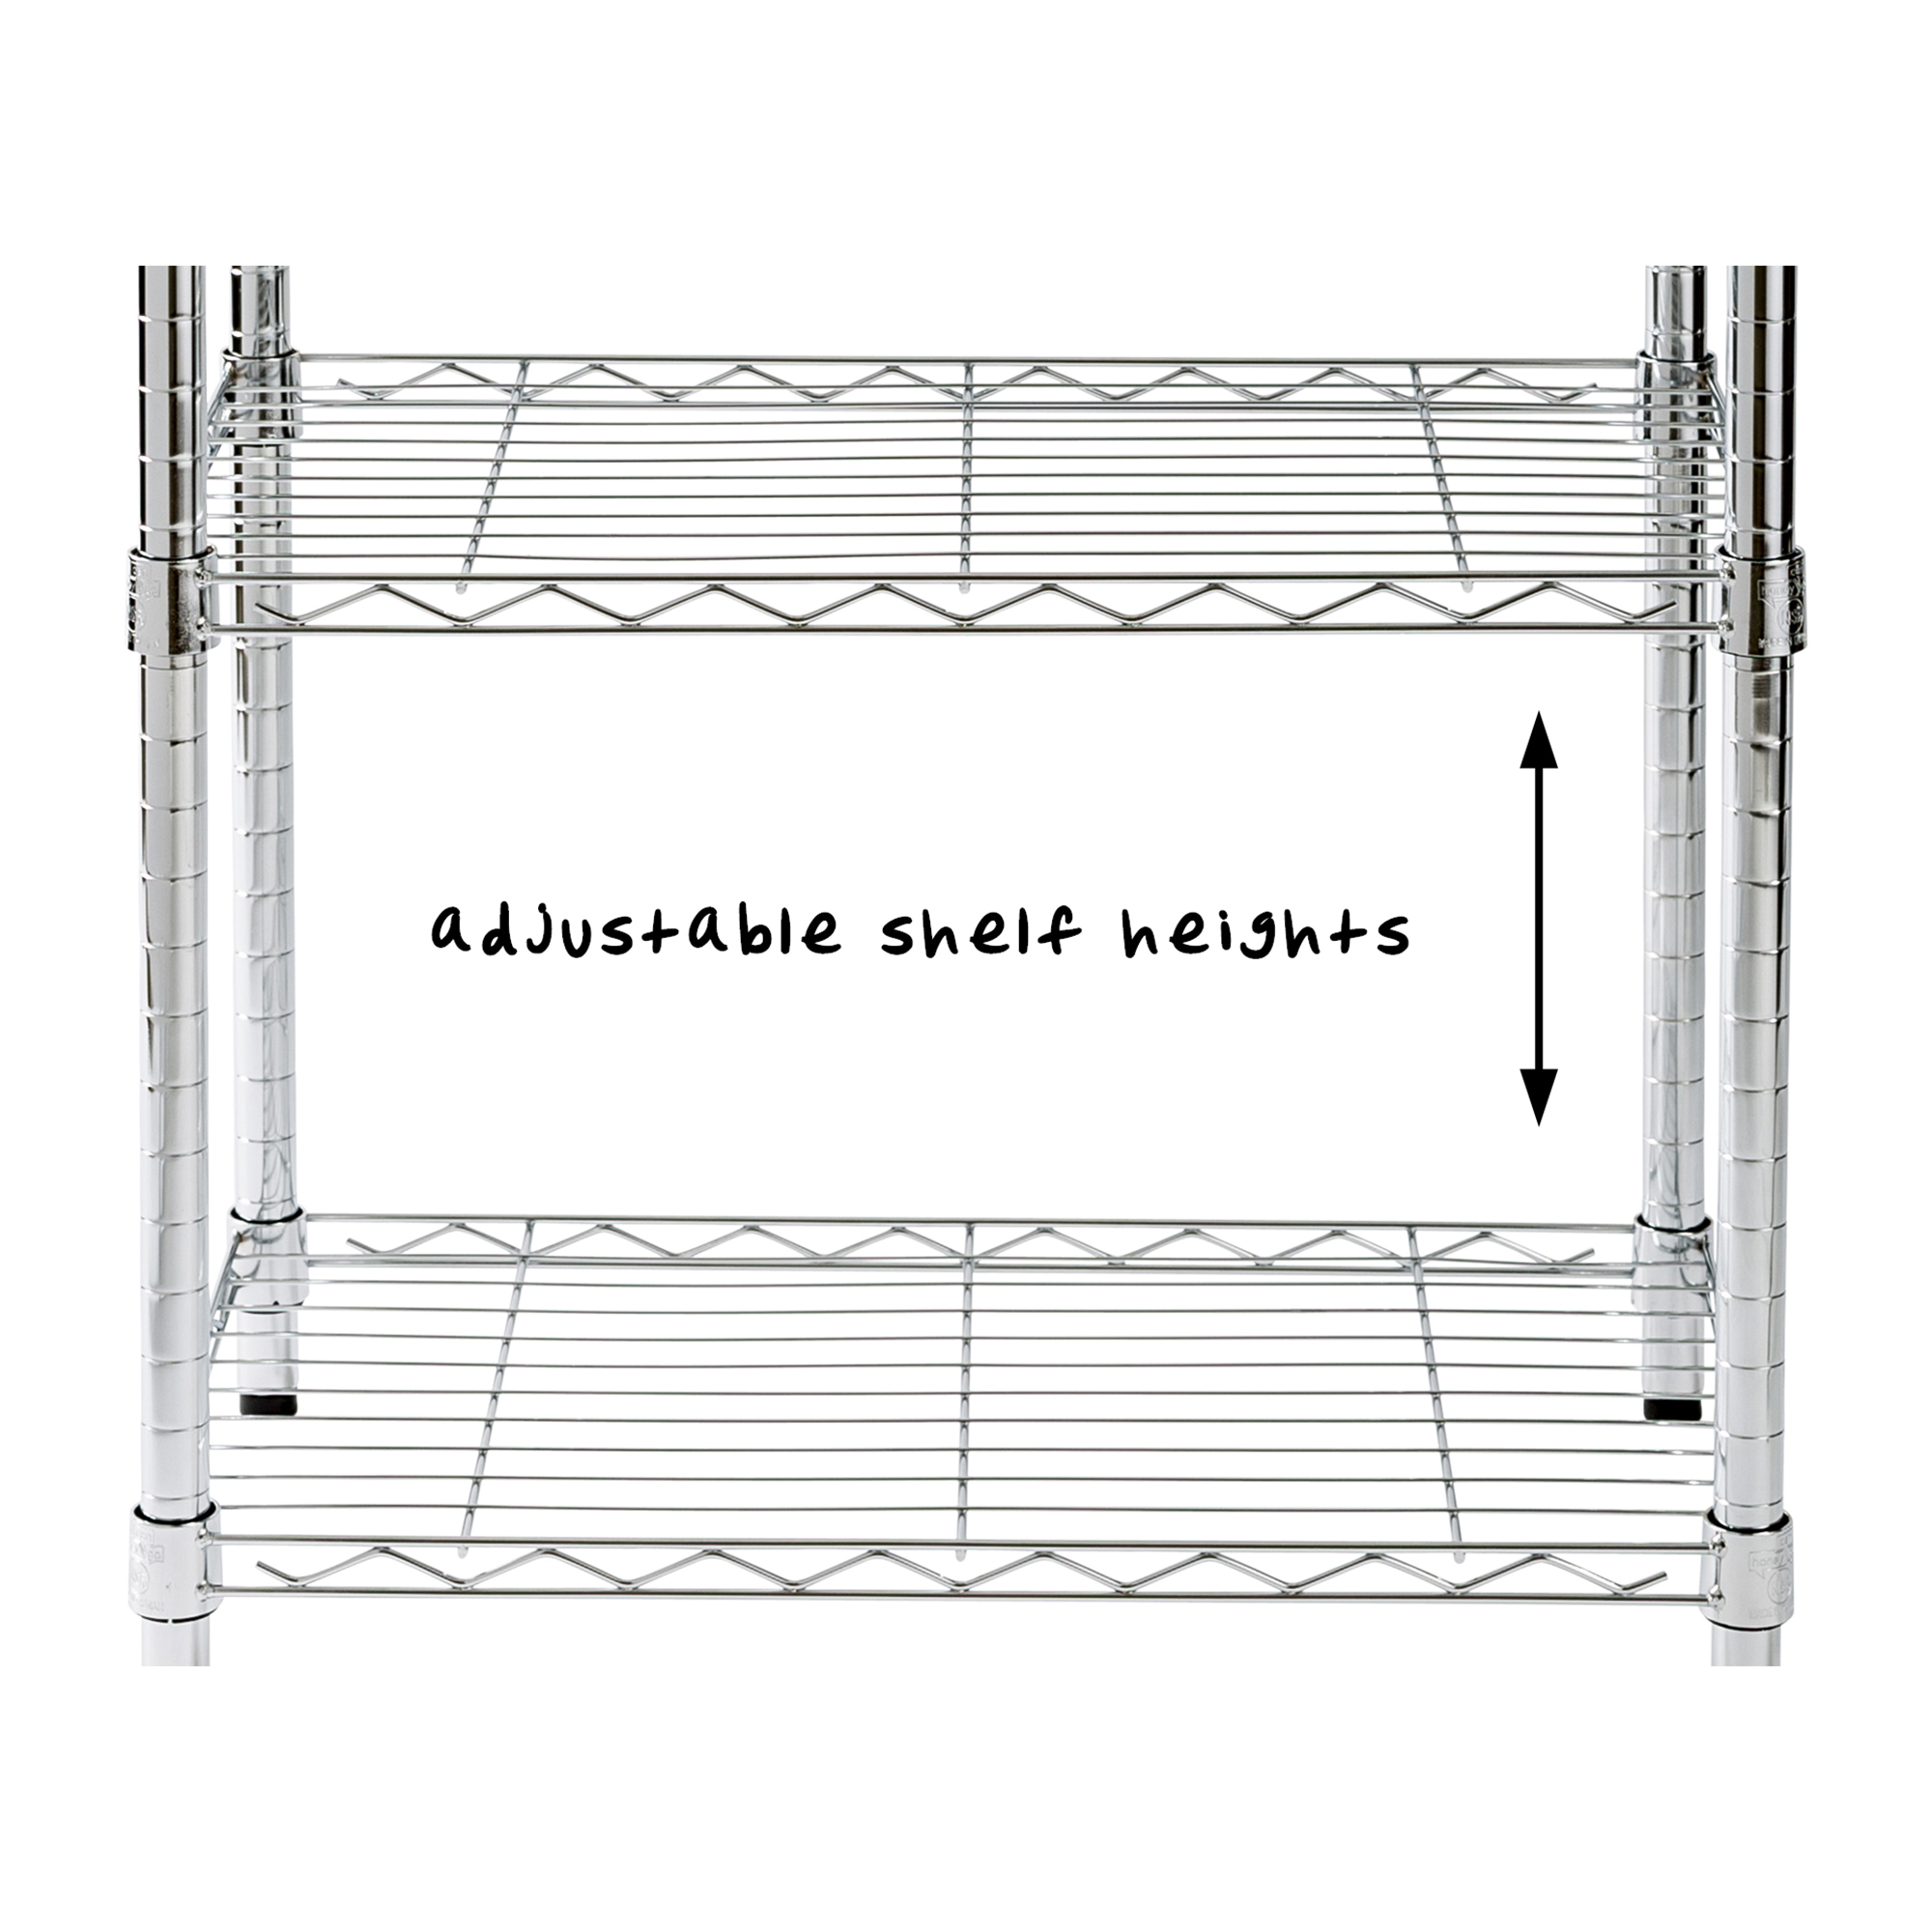 Honey-Can-Do 3-Tier Heavy-Duty Steel Adjustable Shelving Unit, Chrome, Holds up to 250 lb per Shelf - image 5 of 9